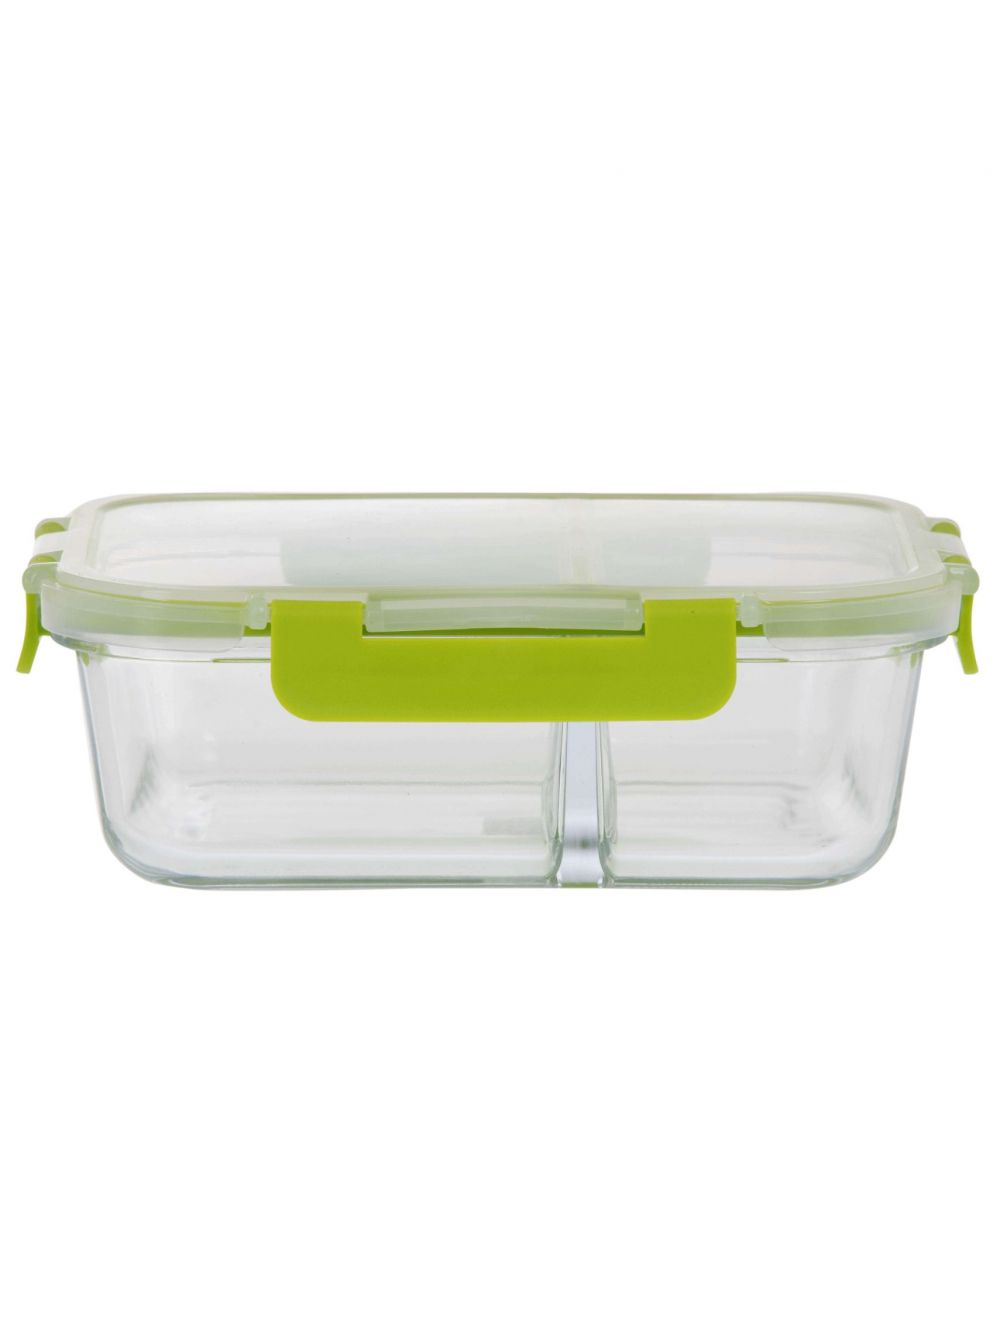 Royalford RF9215 1000 ml Glass Meal Prep Container